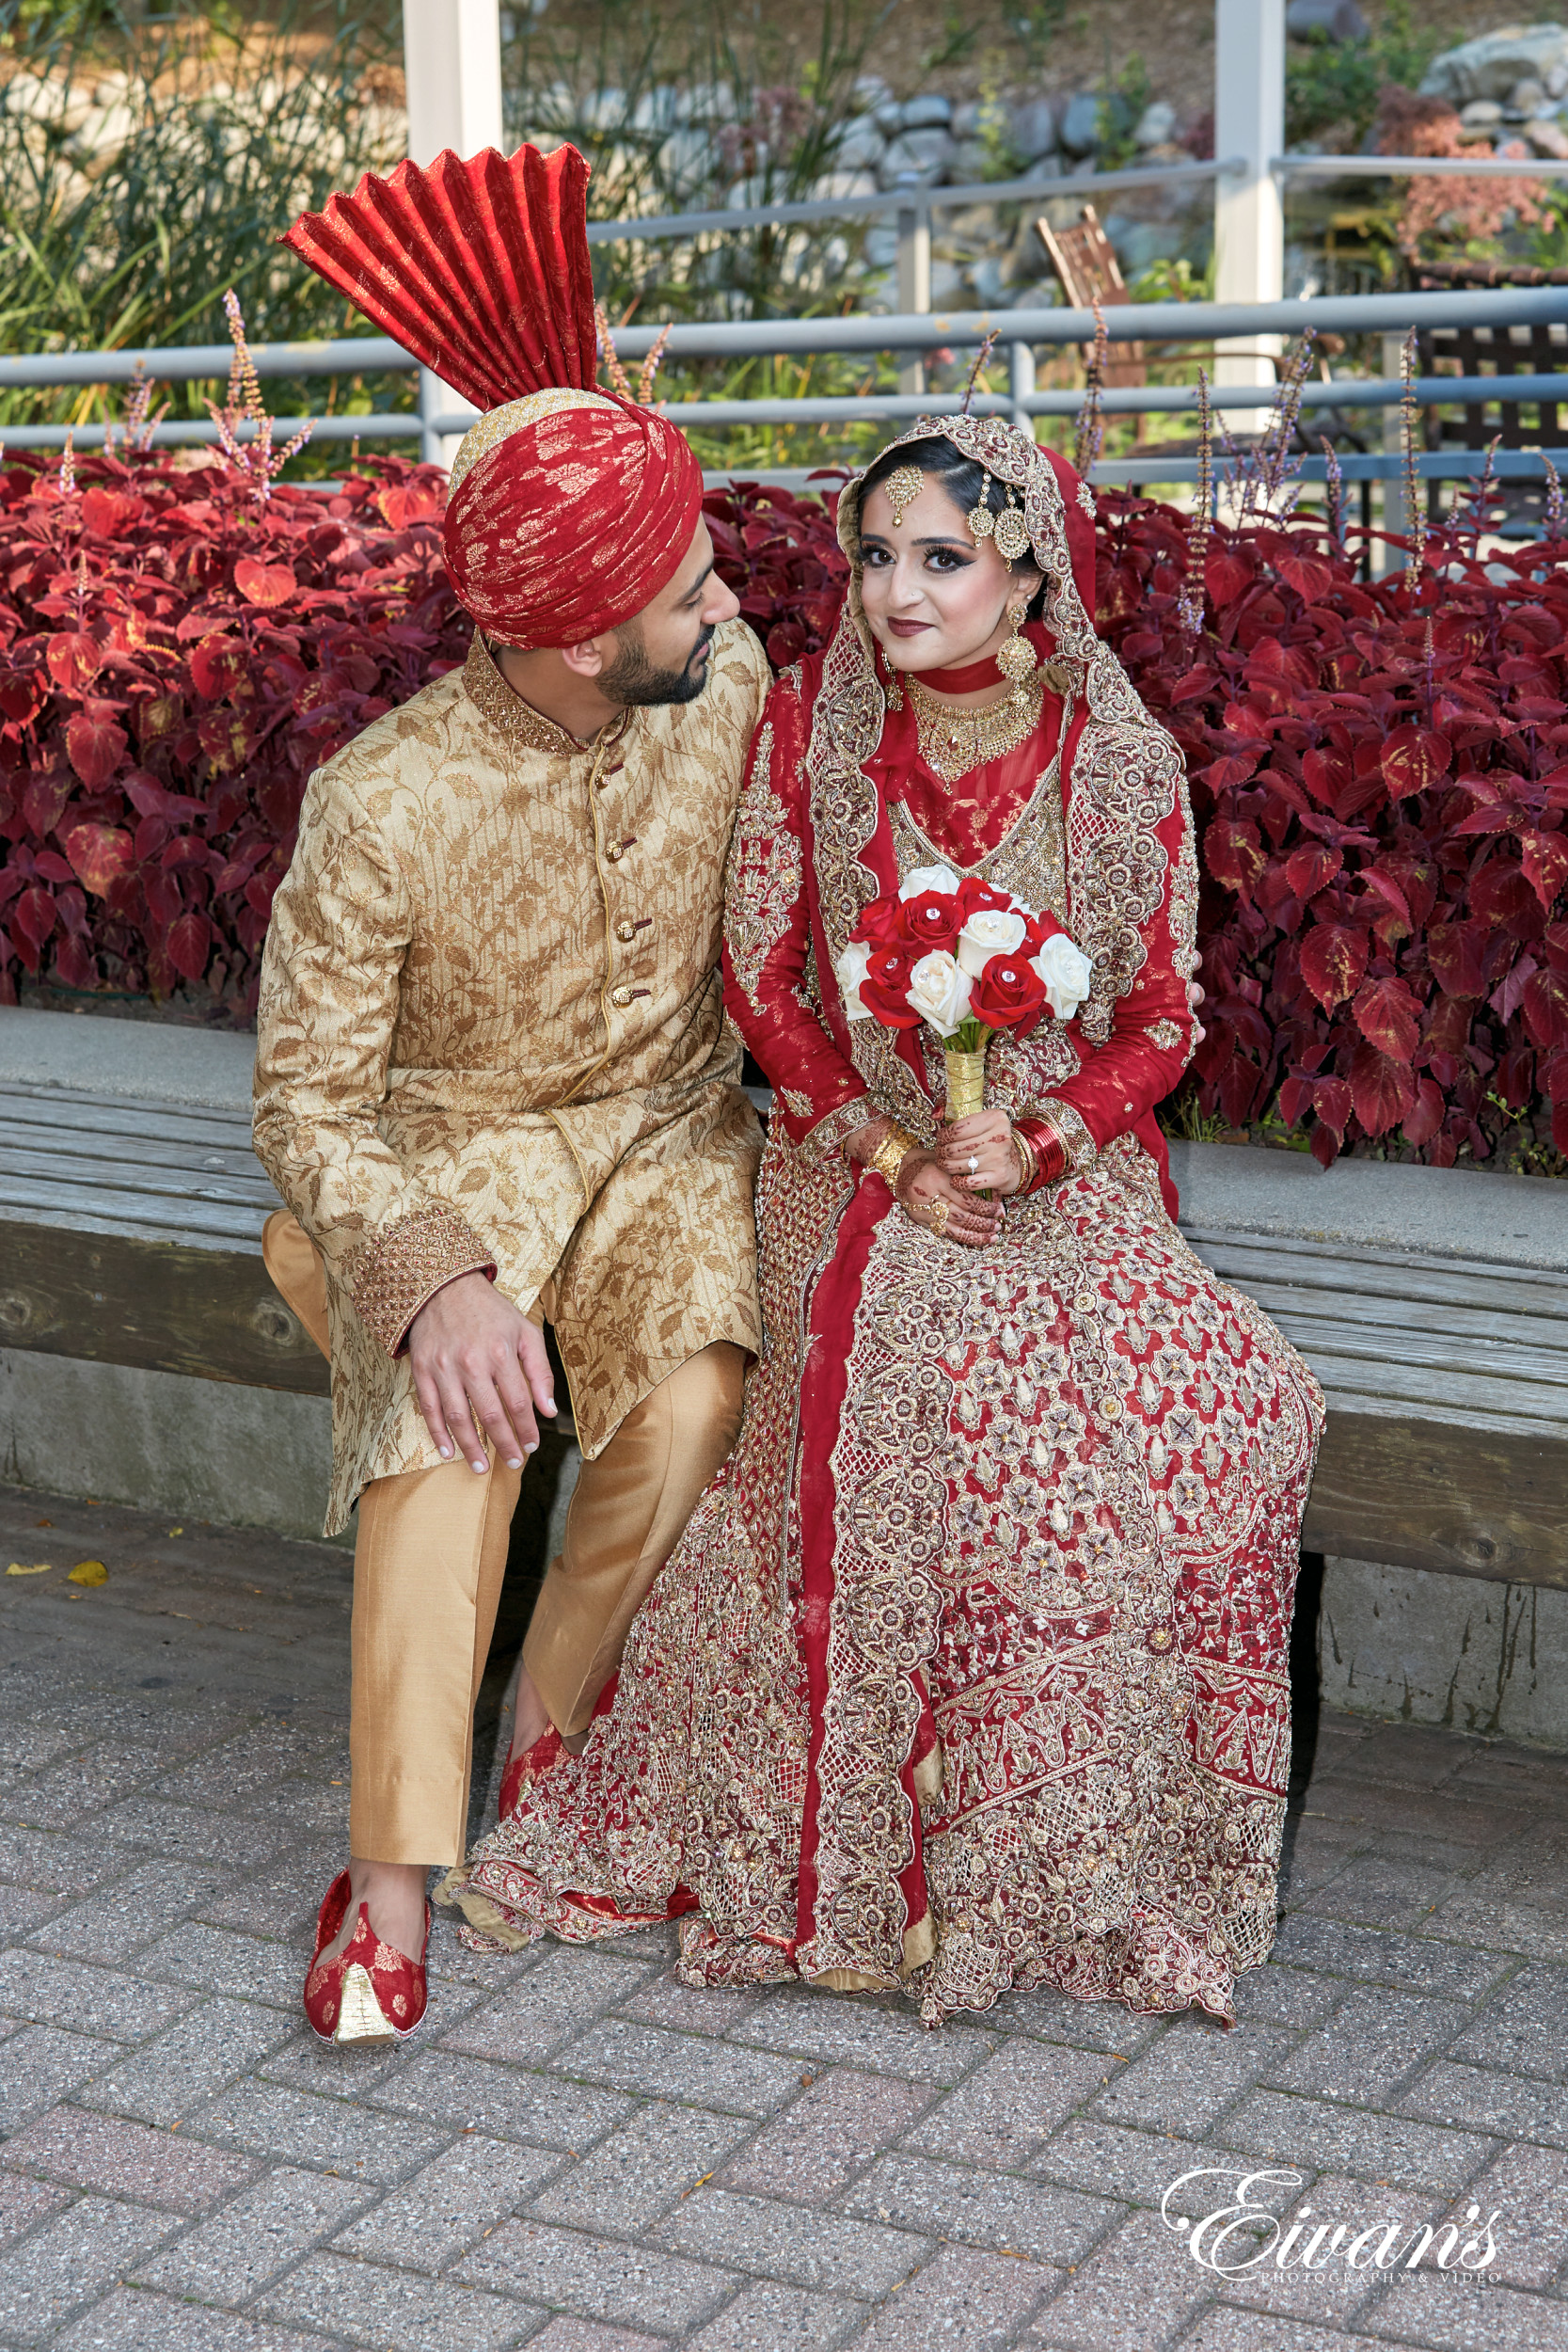 Everything You Need to Know About Indian Wedding Traditions